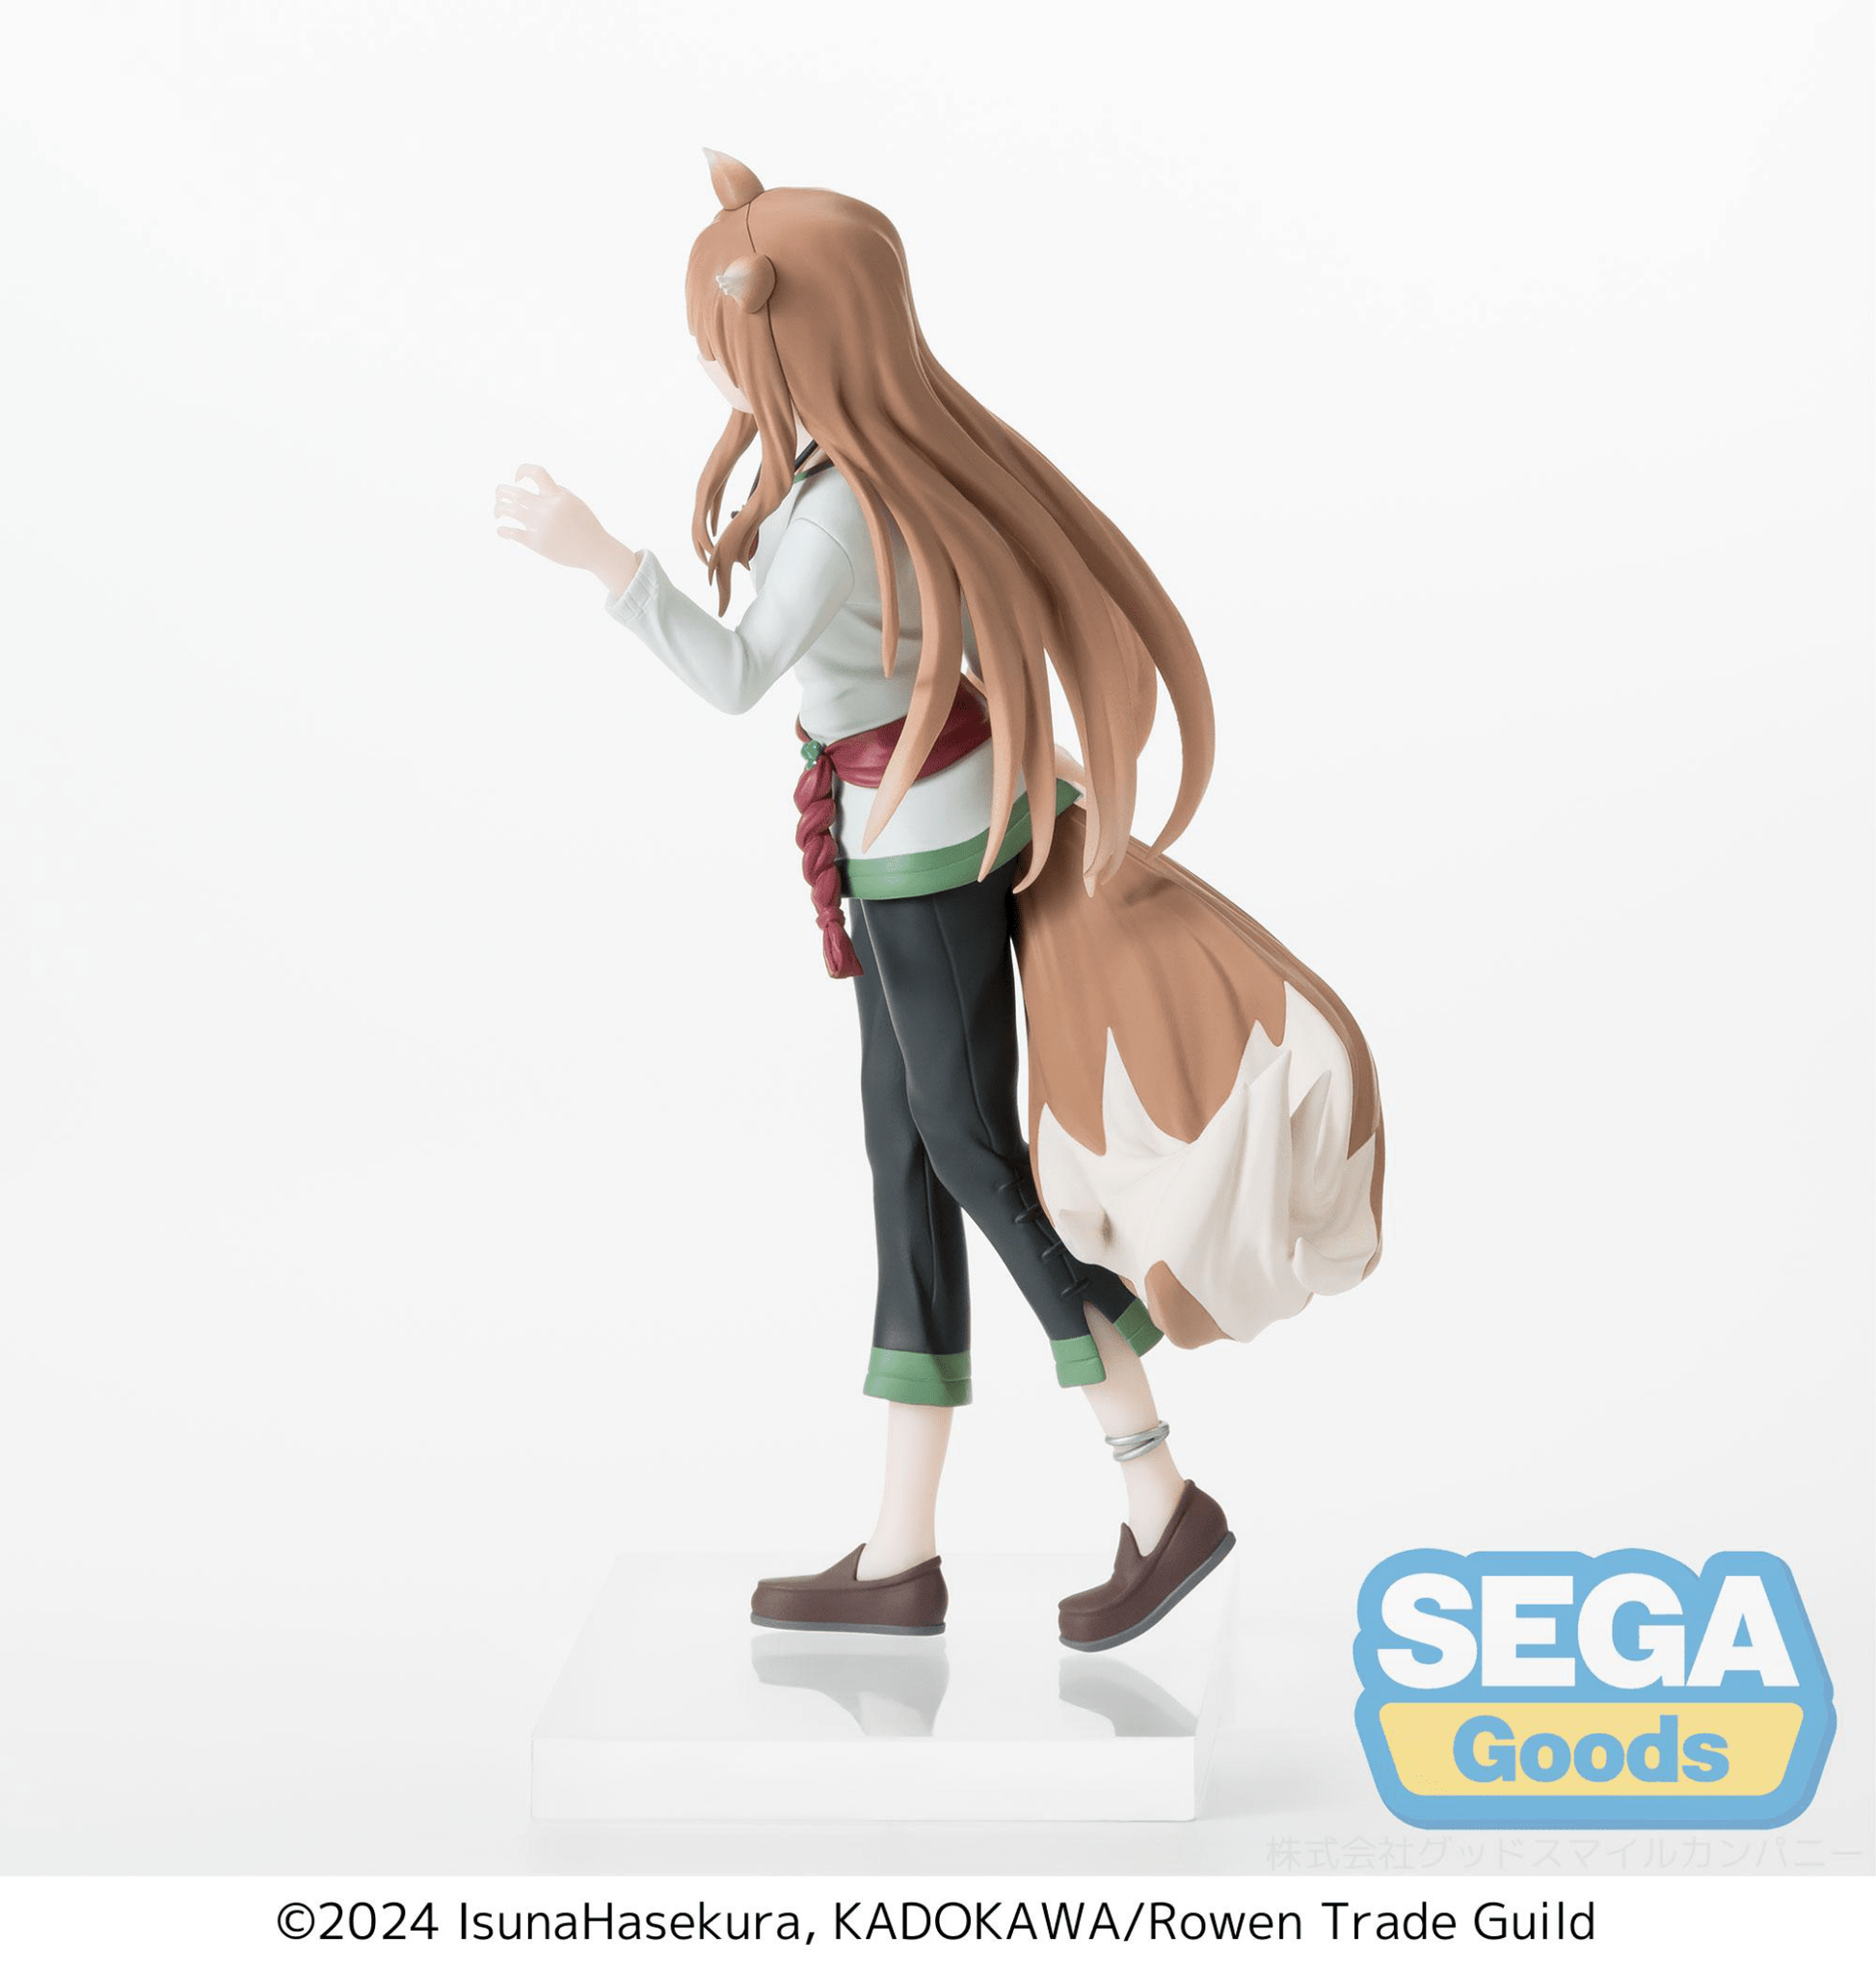 SEGA - Desktop x Decorate Collections Holo (Spice and Wolf: MERCHANT MEETS THE WISE WOLF) - Good Game Anime